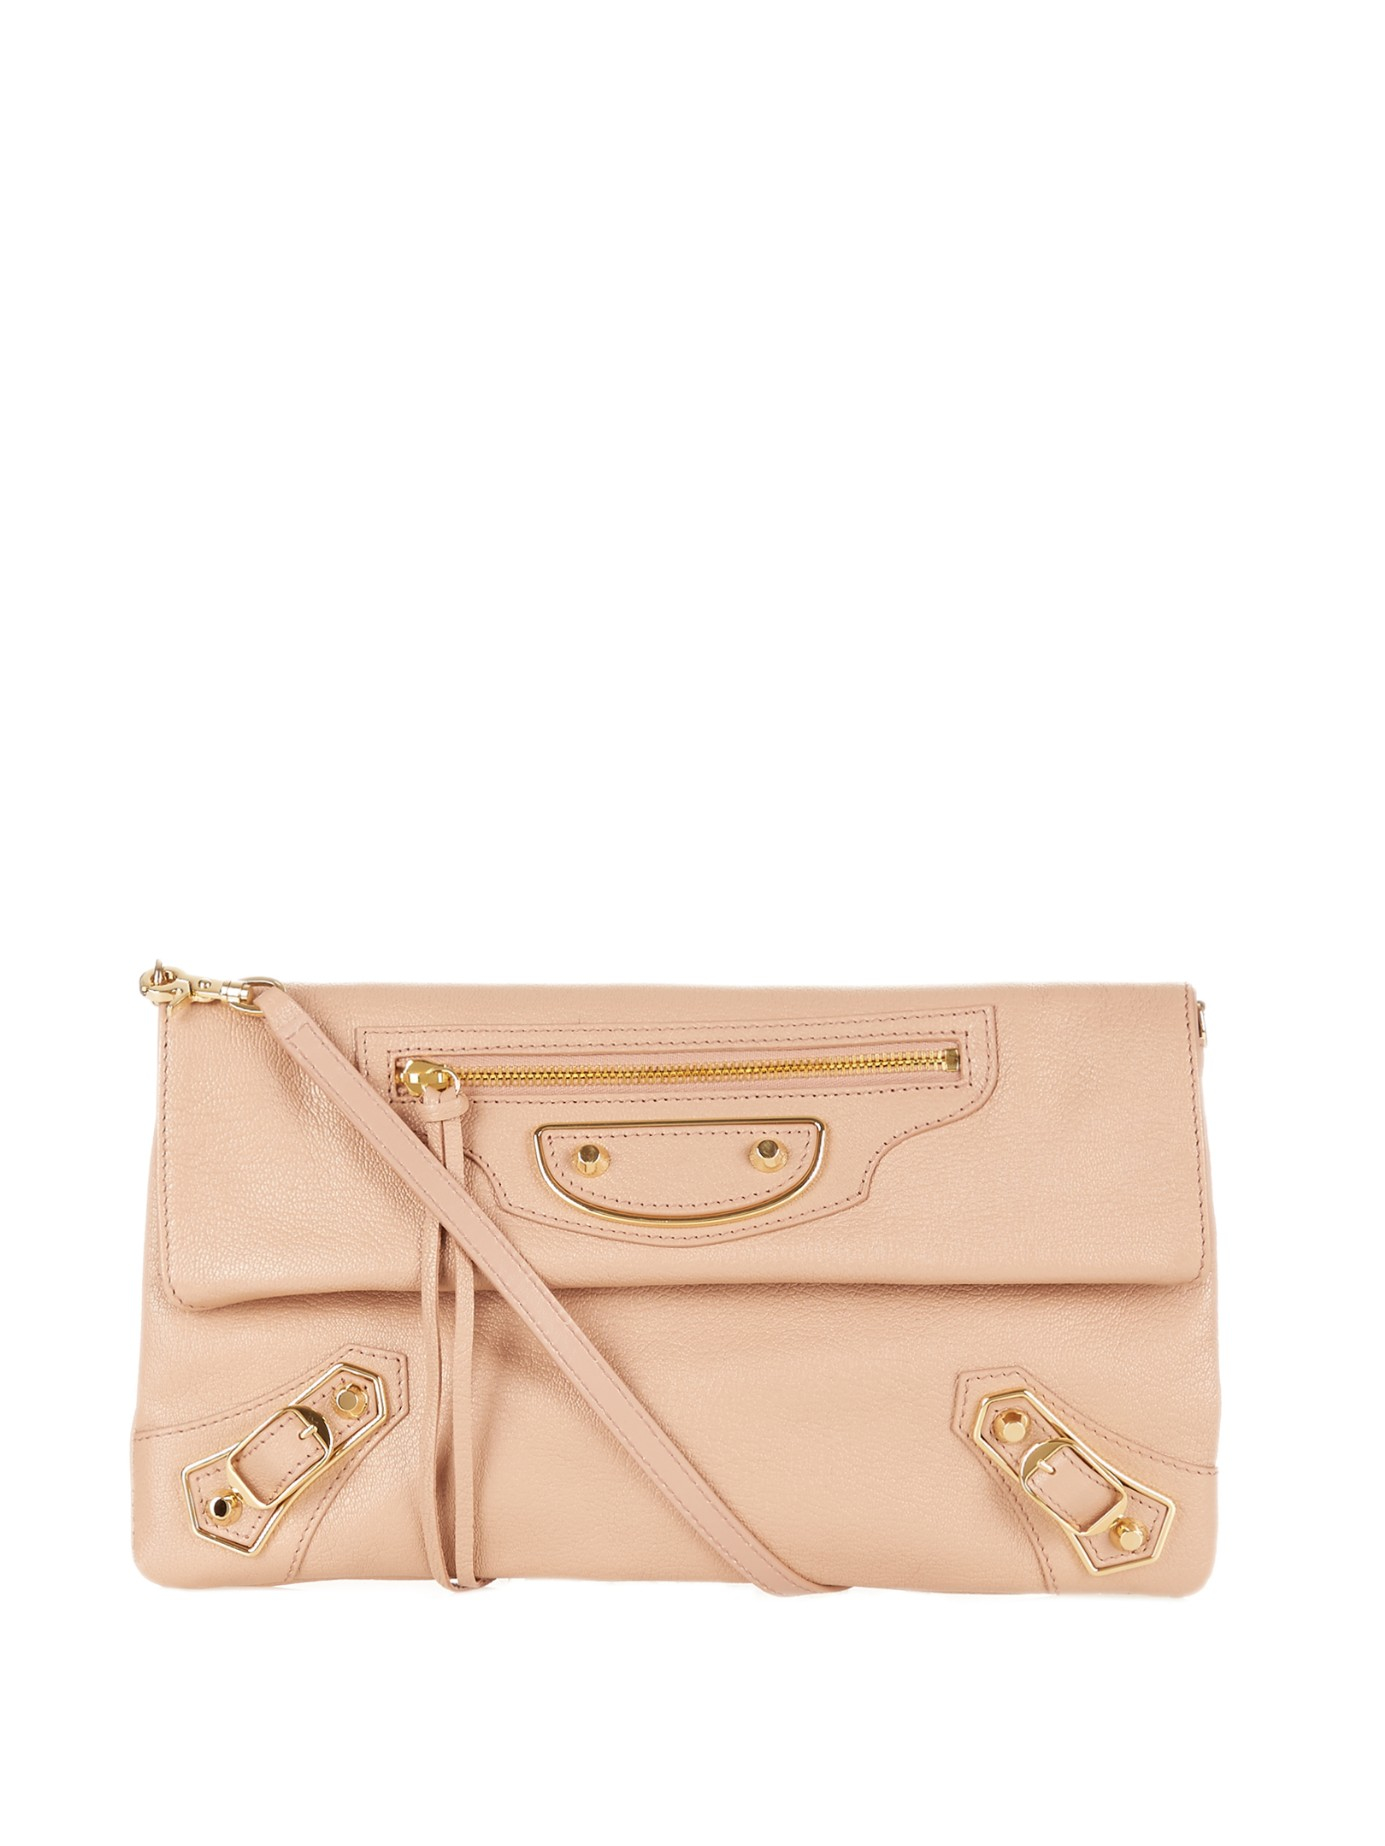 Balenciaga Classic Metallic-edge Leather Envelope Clutch in Light Pink  (Pink) - Lyst